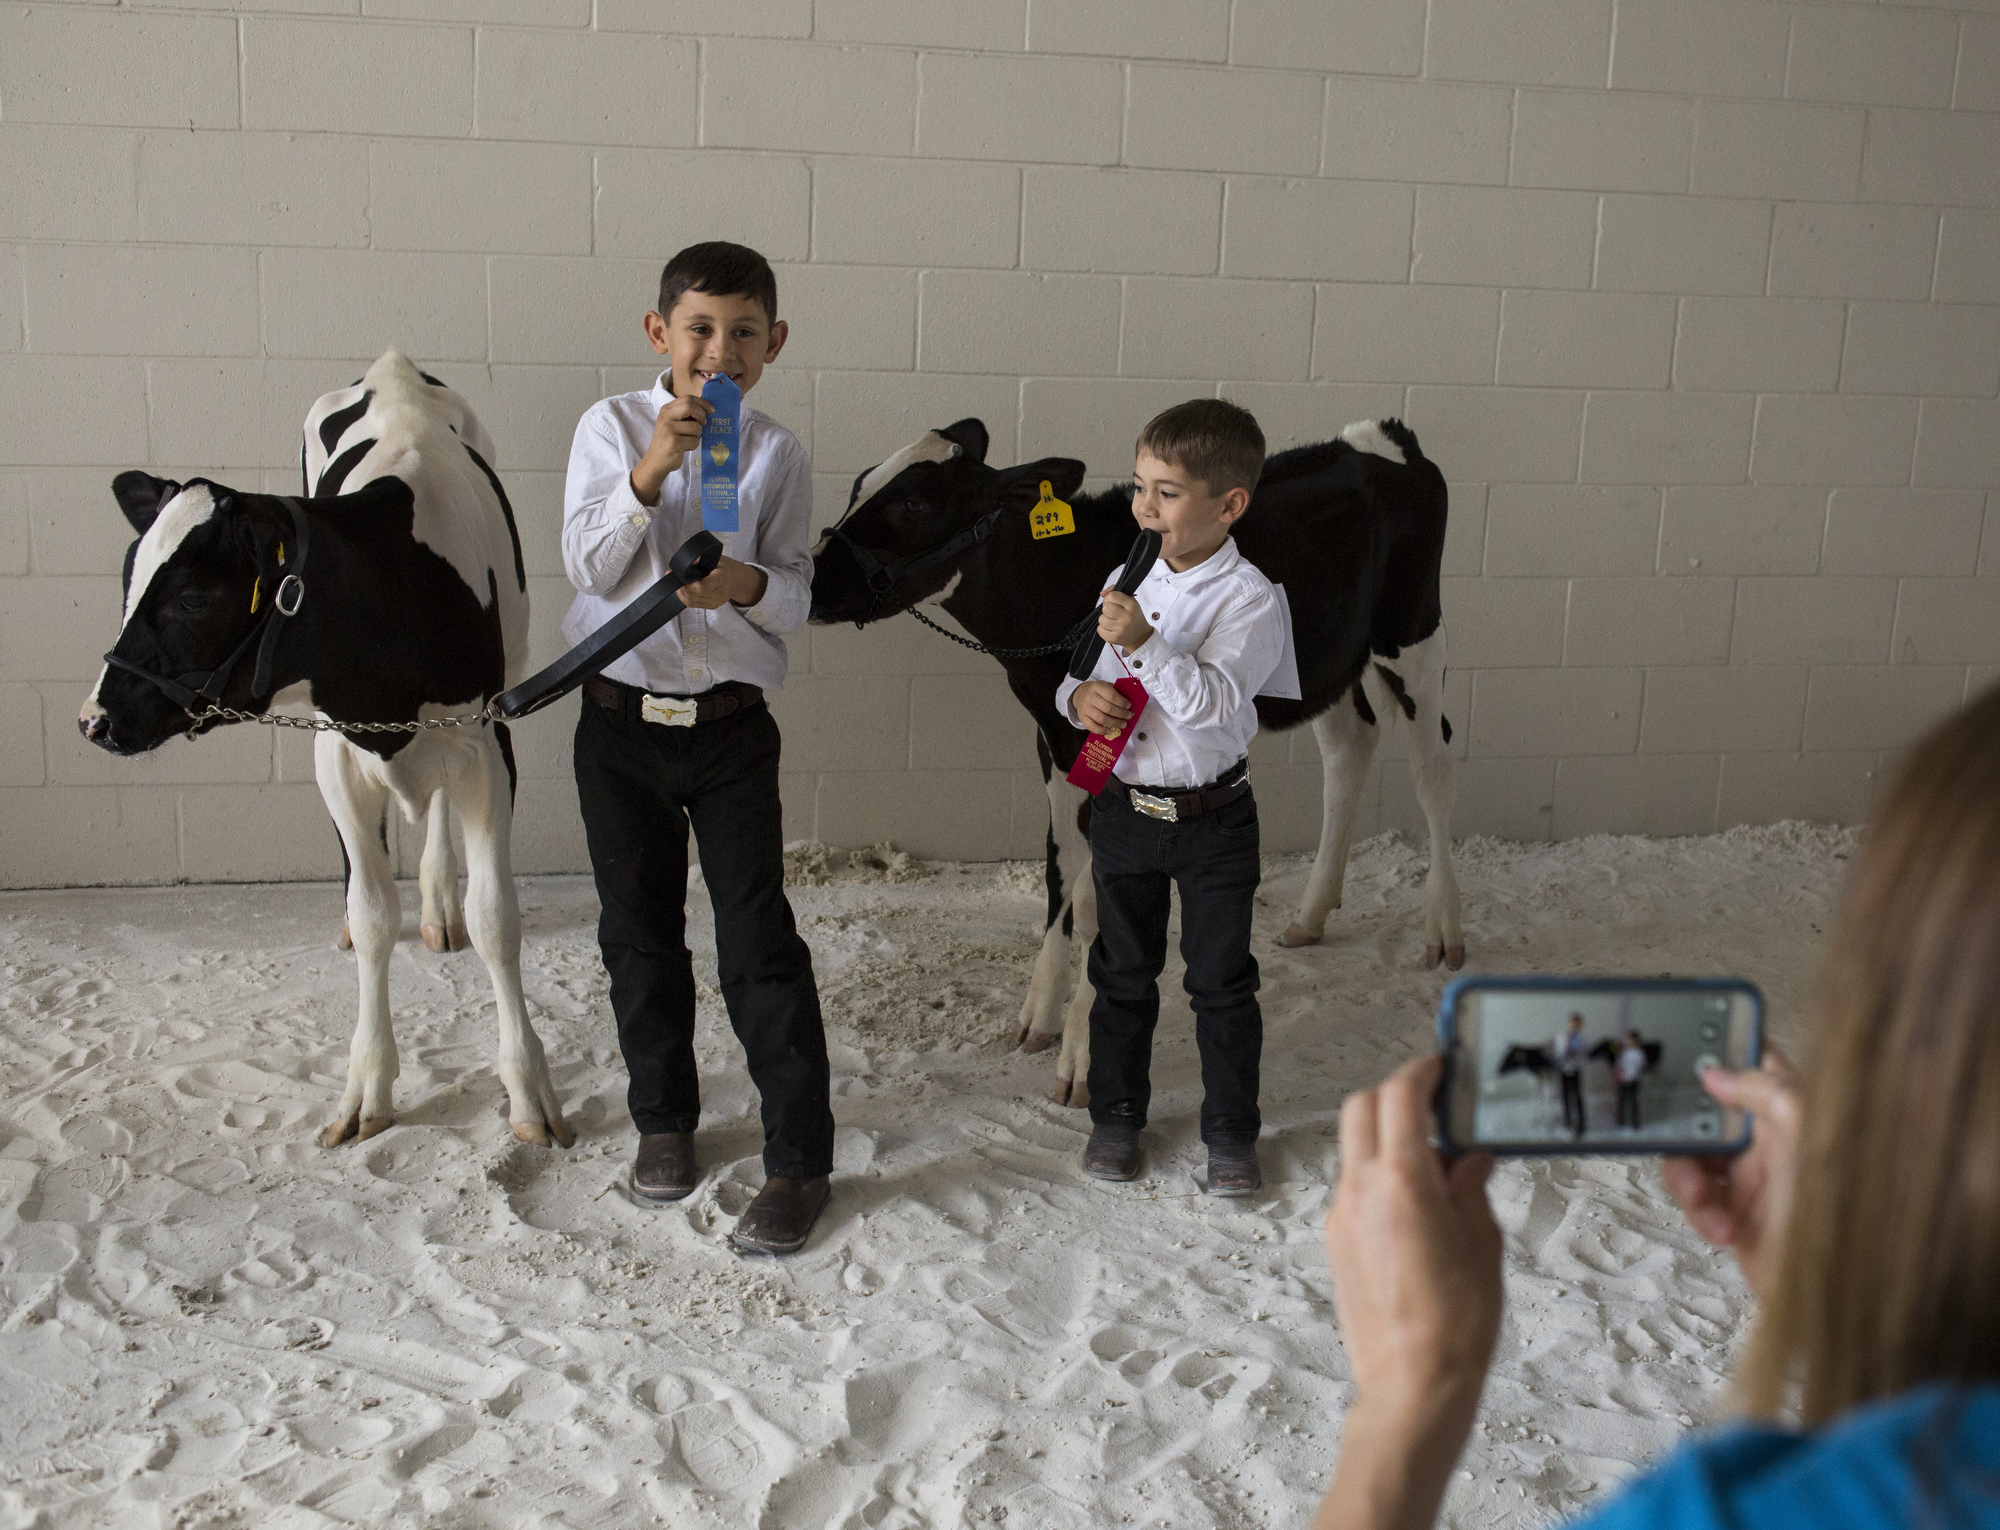  Alex Busciglio, 9, and Dominic Busciglio, 5, pose for a photo taken by their mom, Jana Busciglio, after showing Holstein calves at the Florida Strawberry Festival on March 4, 2017, in Plant City, Florida. 